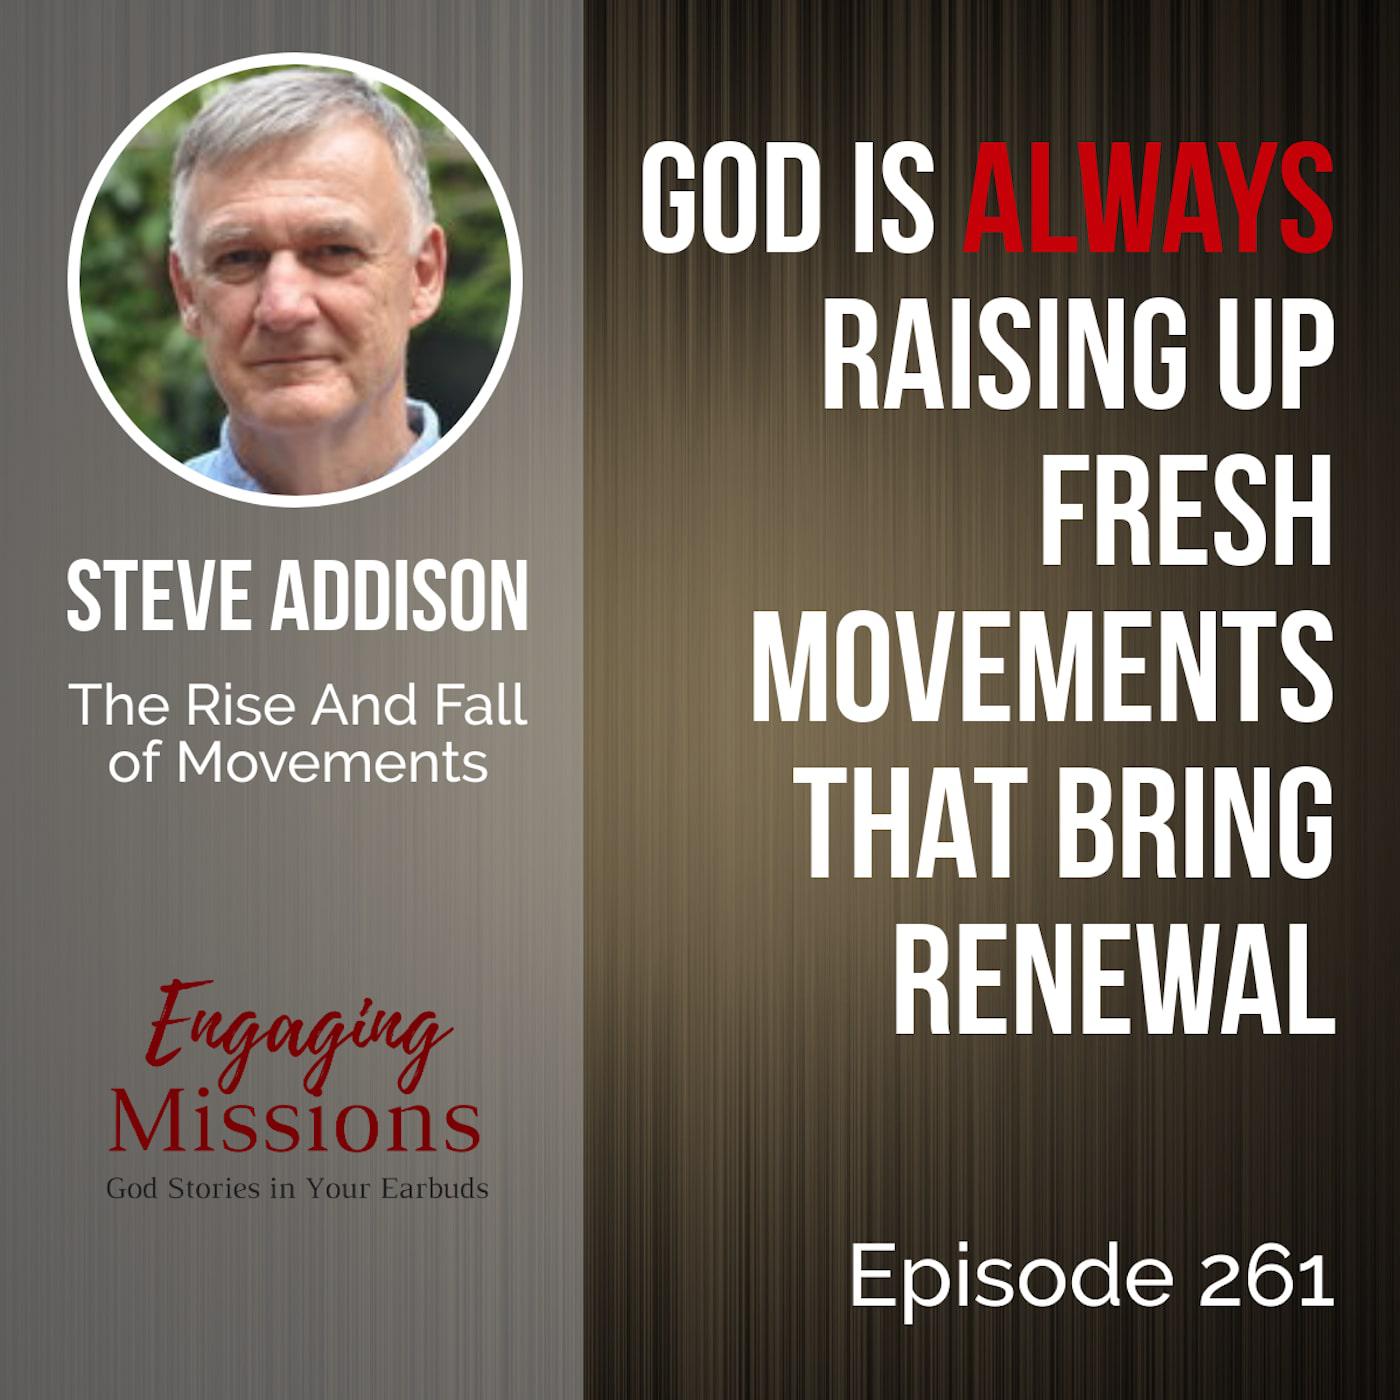 God at Work: The Rise and Fall of Movements, with Steve Addison – EM261